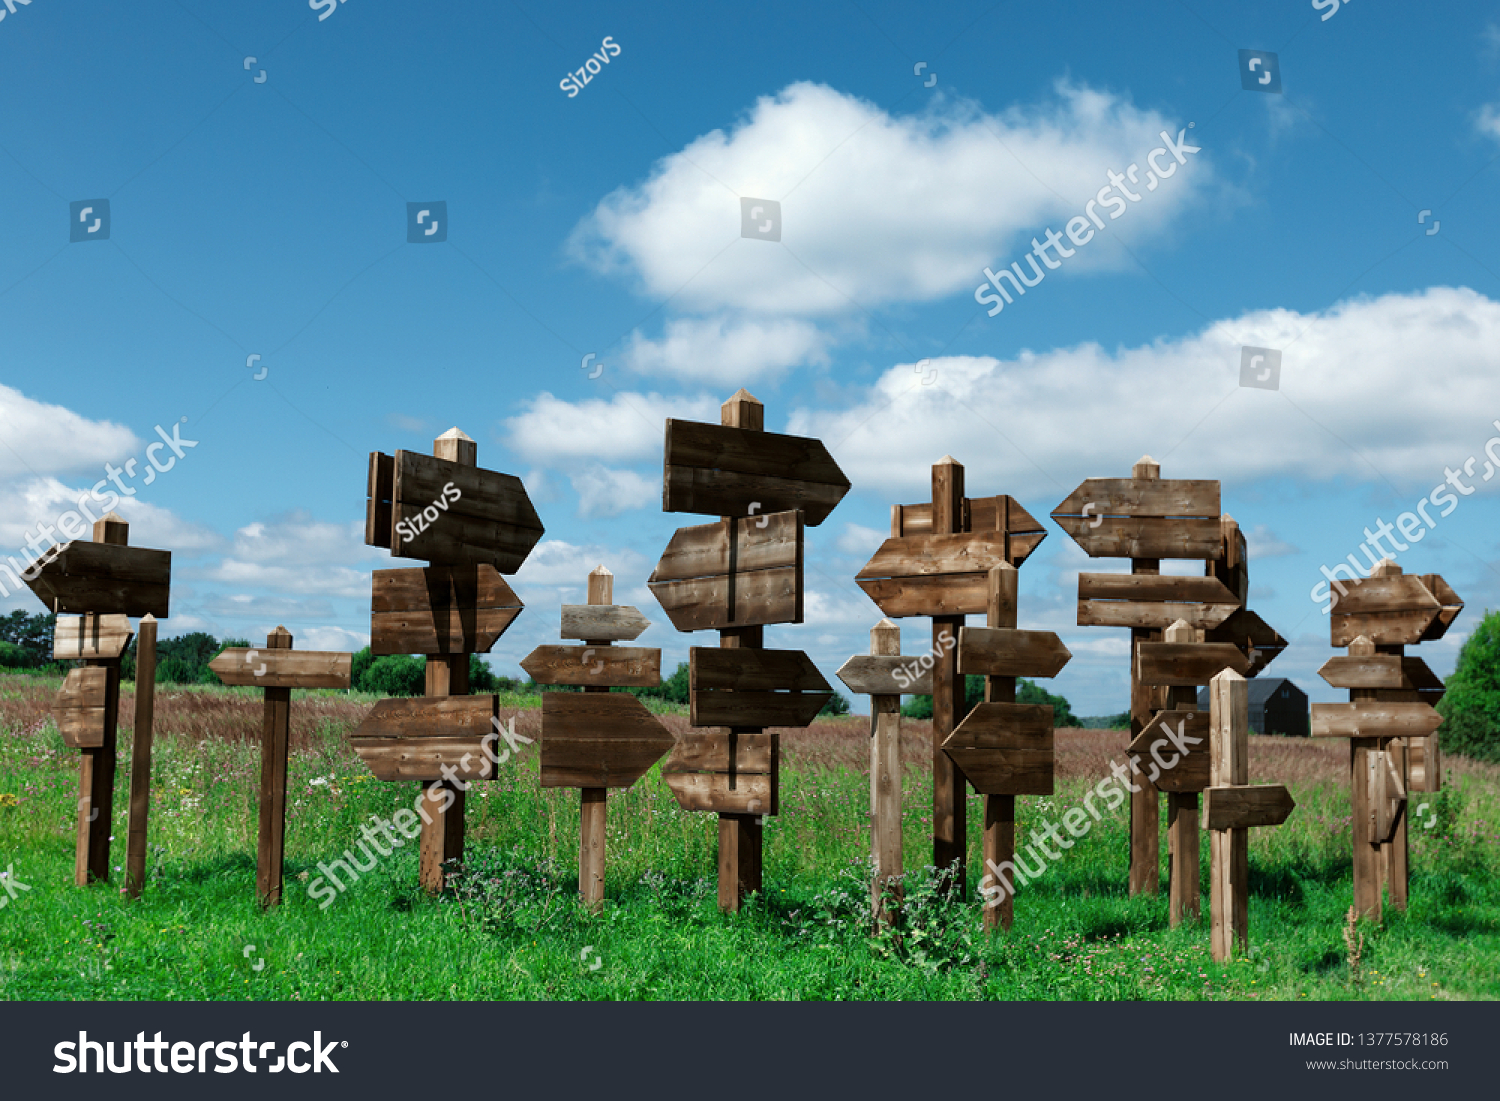 Wooden signs indicating the direction in different directions to different directions. background: cloudy sky. #1377578186